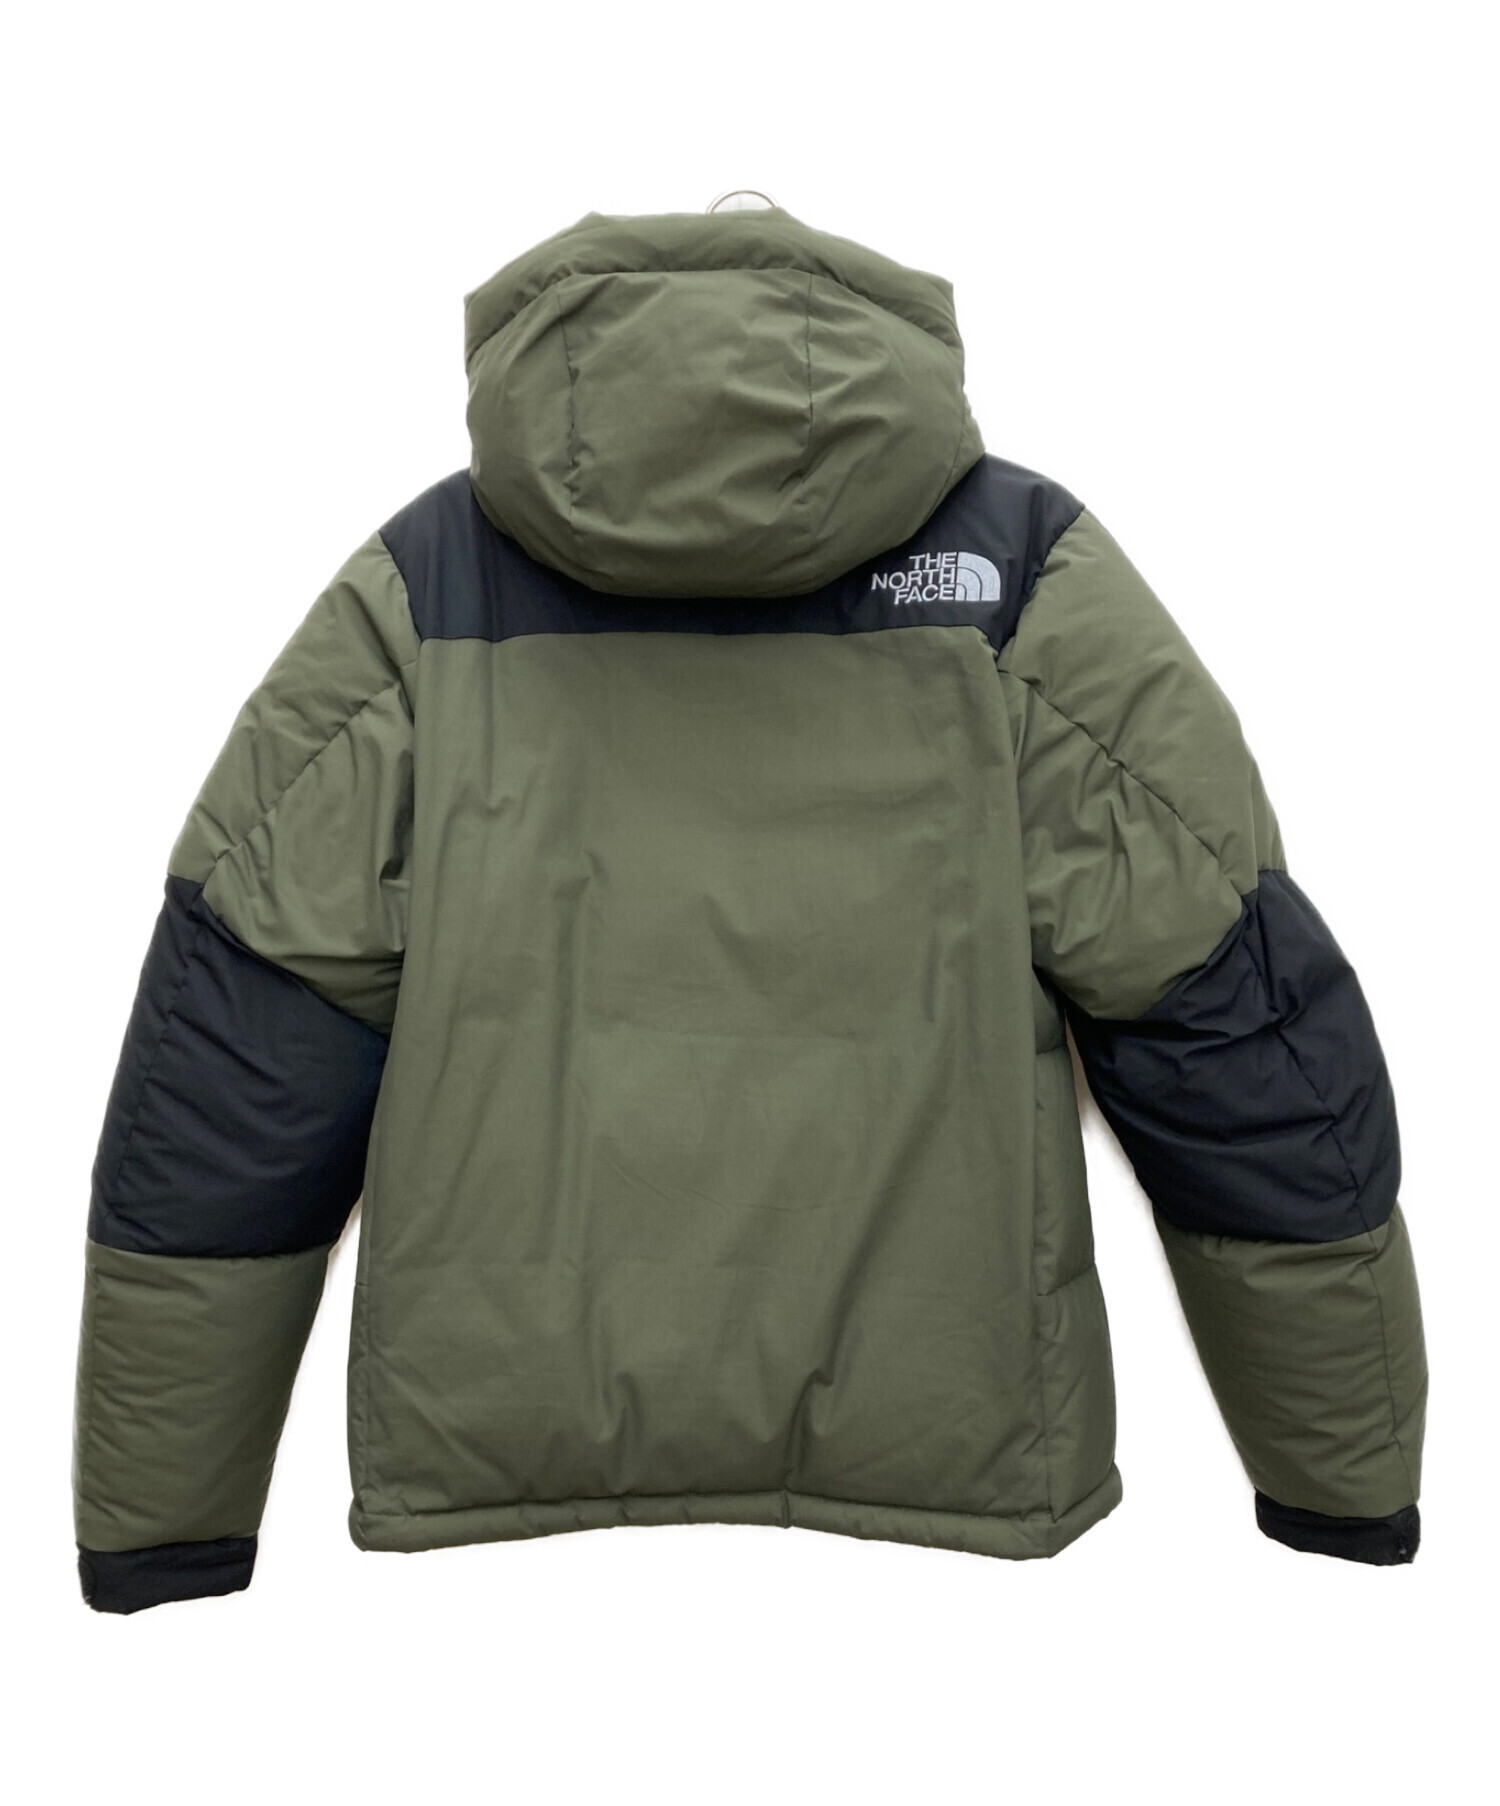 L the north face バルトロライトジャケット ニュートープメンズ 